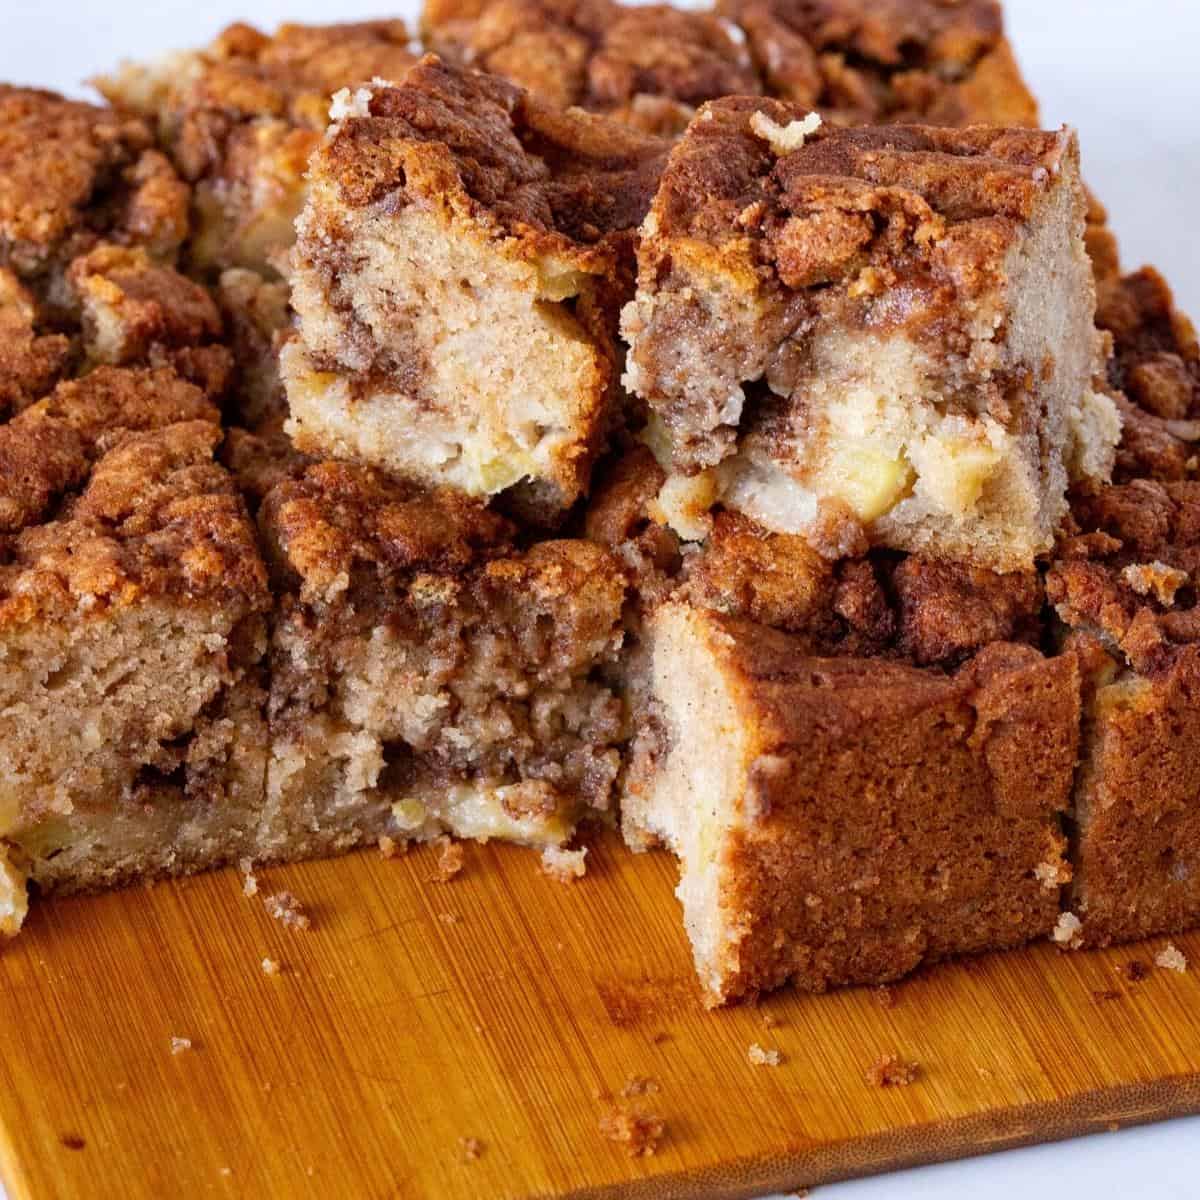 Squares of apple cake on a board.